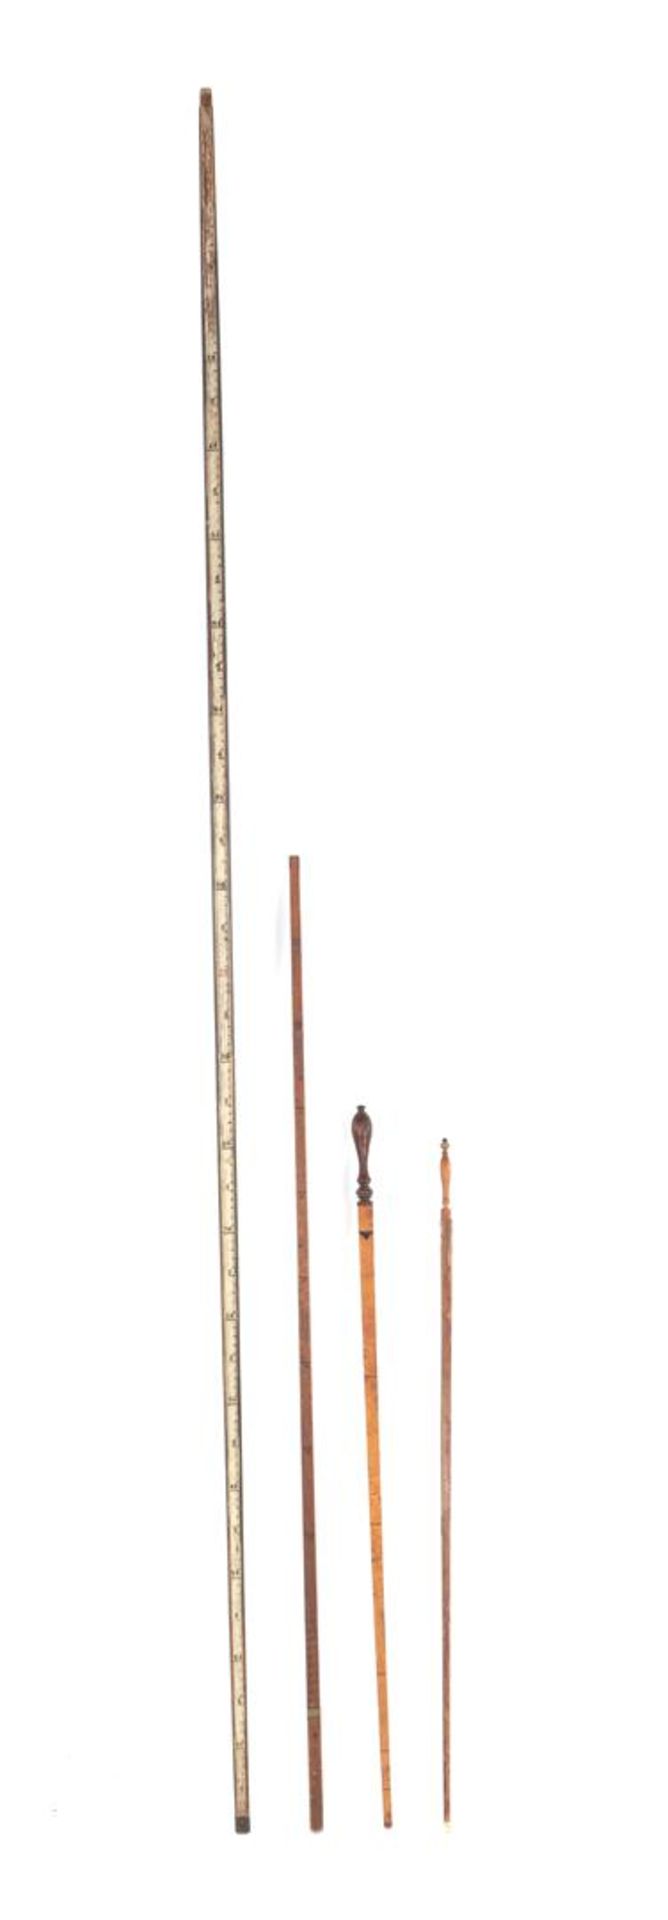 4 measuring rods